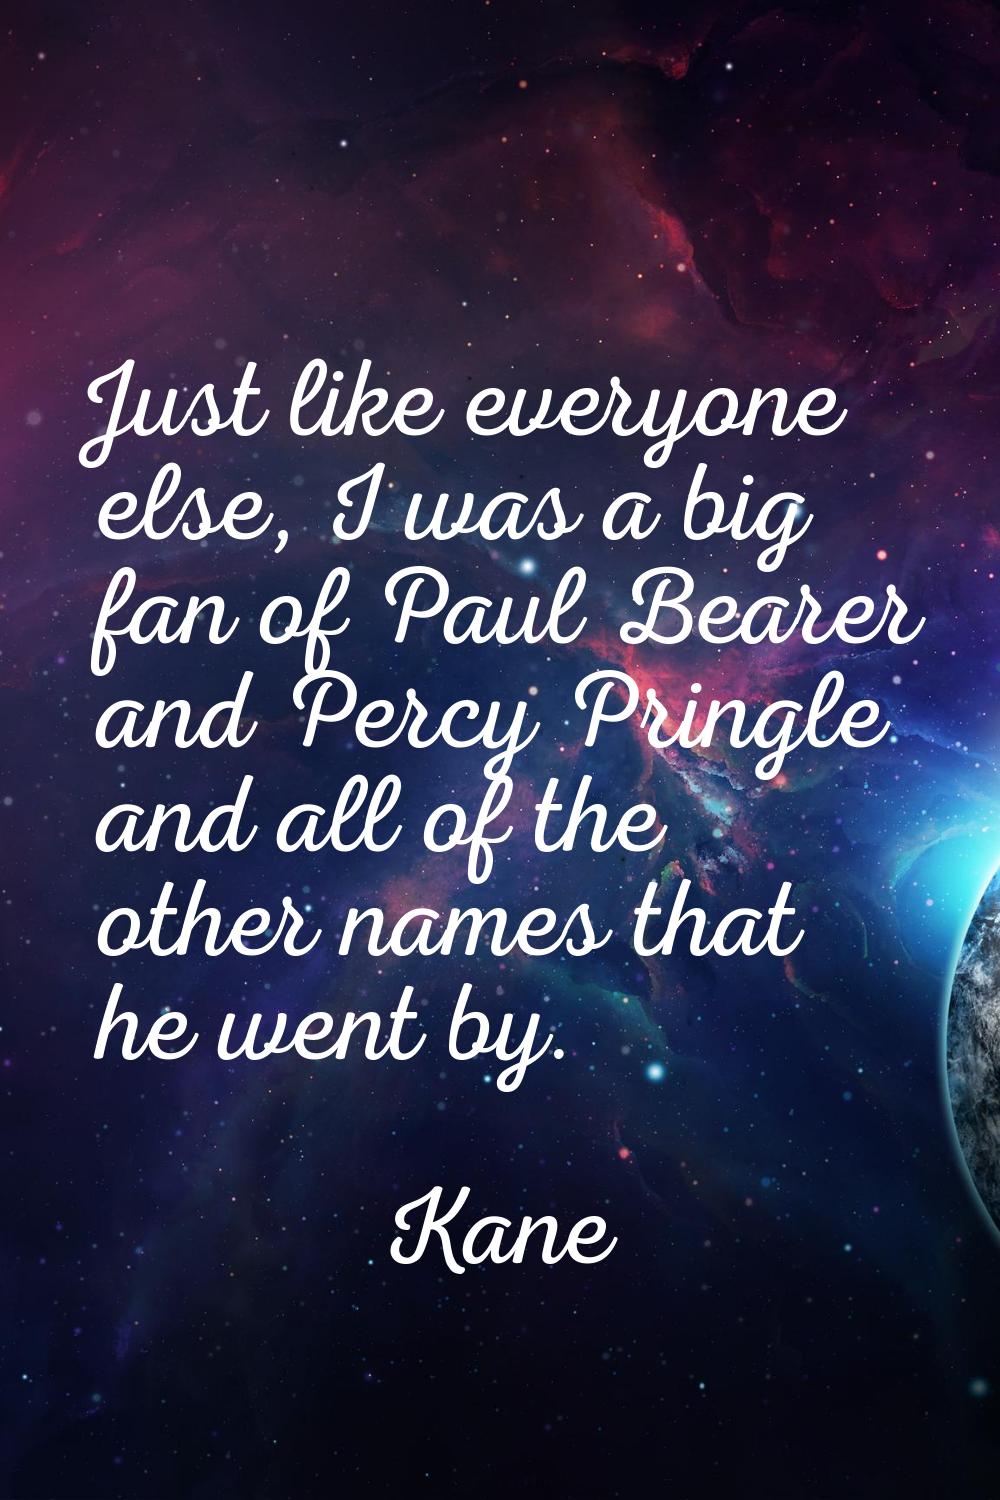 Just like everyone else, I was a big fan of Paul Bearer and Percy Pringle and all of the other name